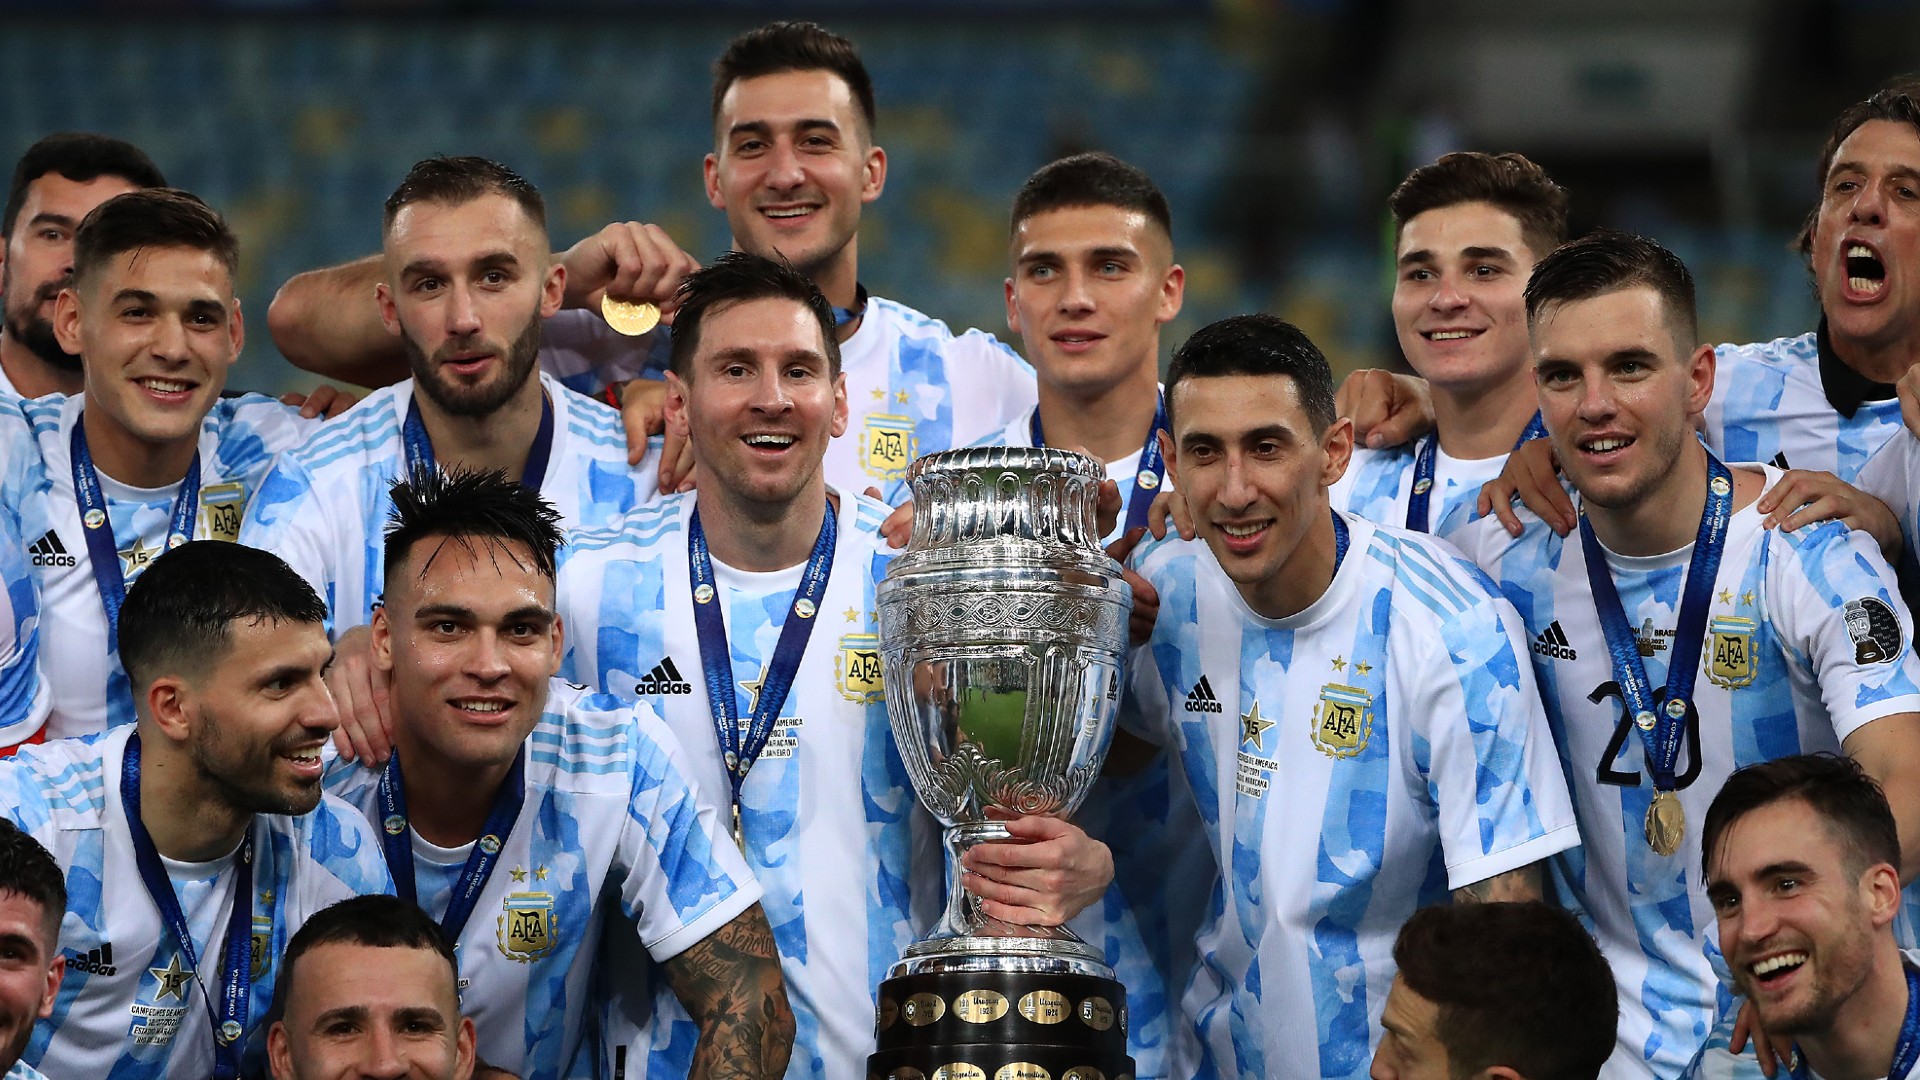 International Friendlies 2022 LIVE: Argentina looking to stay in strong form vs Honduras, watch Argentina vs Honduras LIVE, predicted XI, live streaming - Follow live